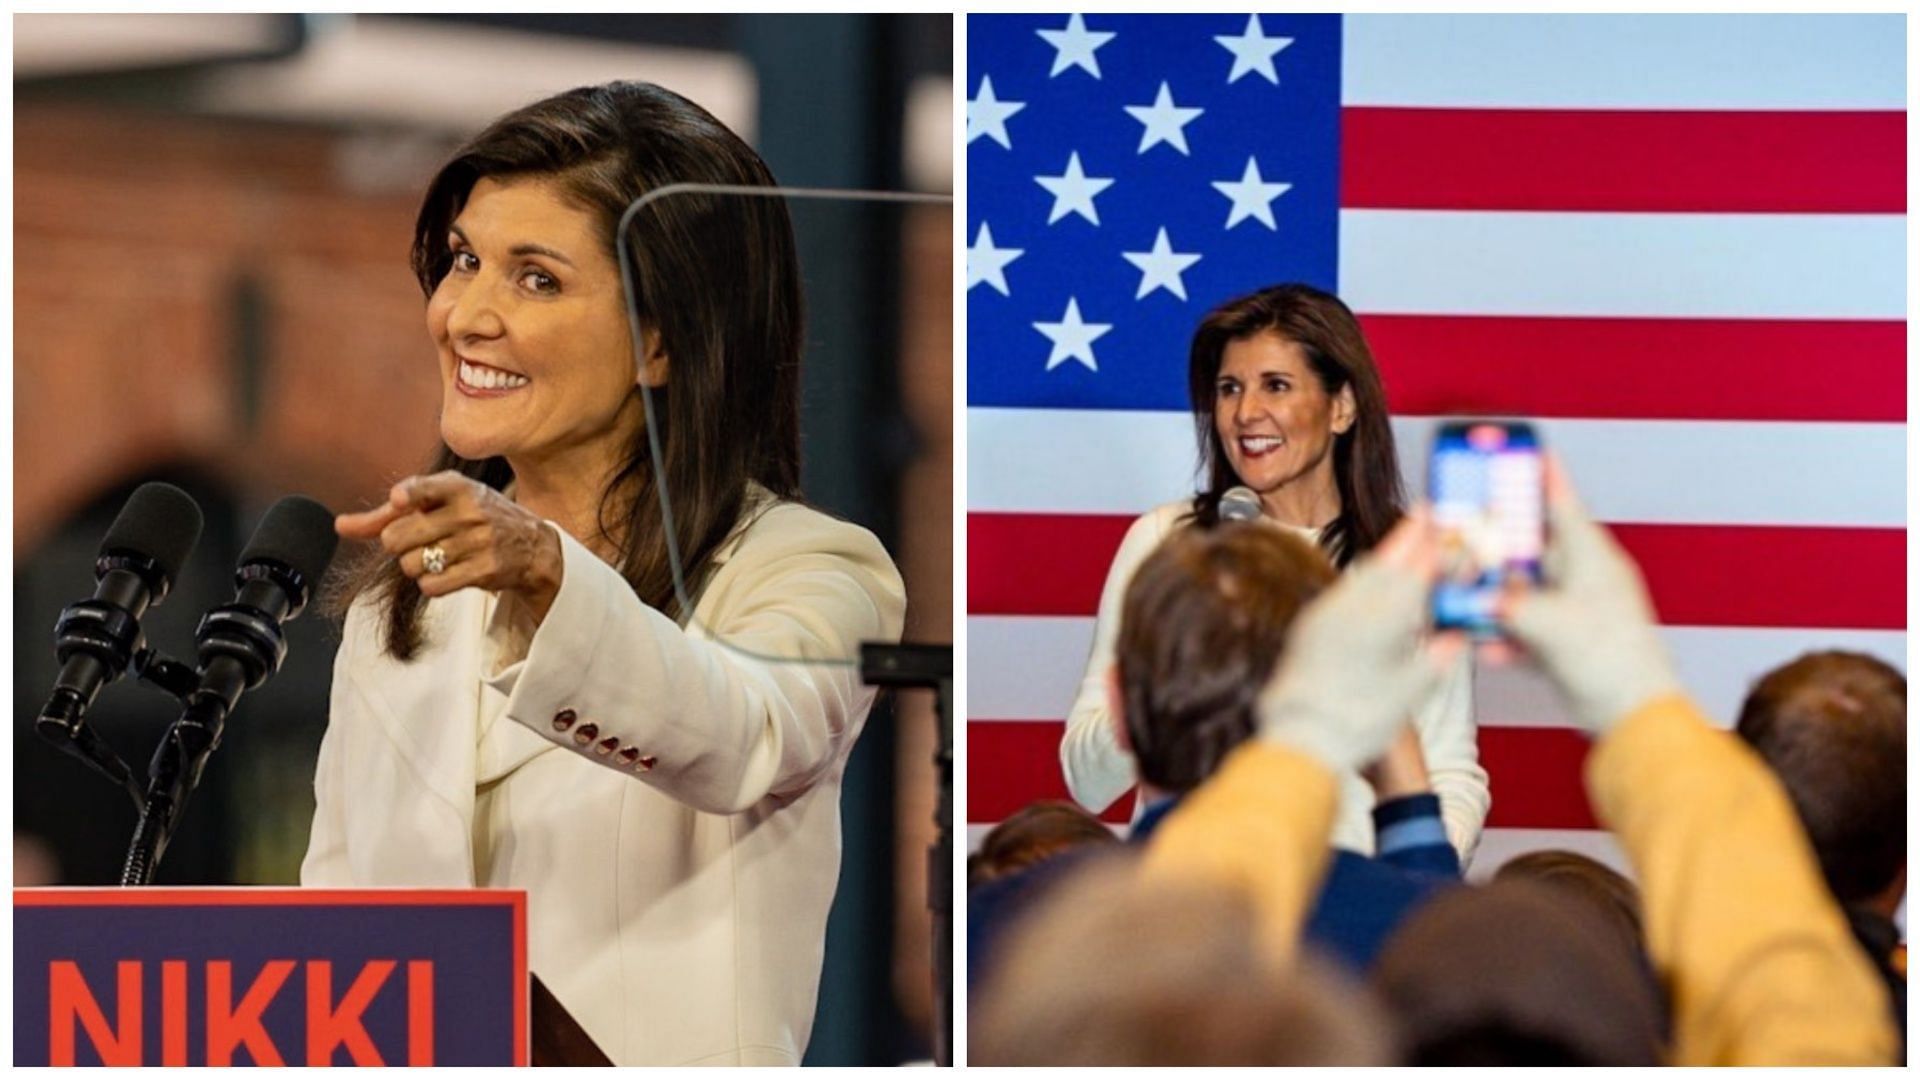 Nikki Haley sparked wild online reactions after answering a question on her campaign